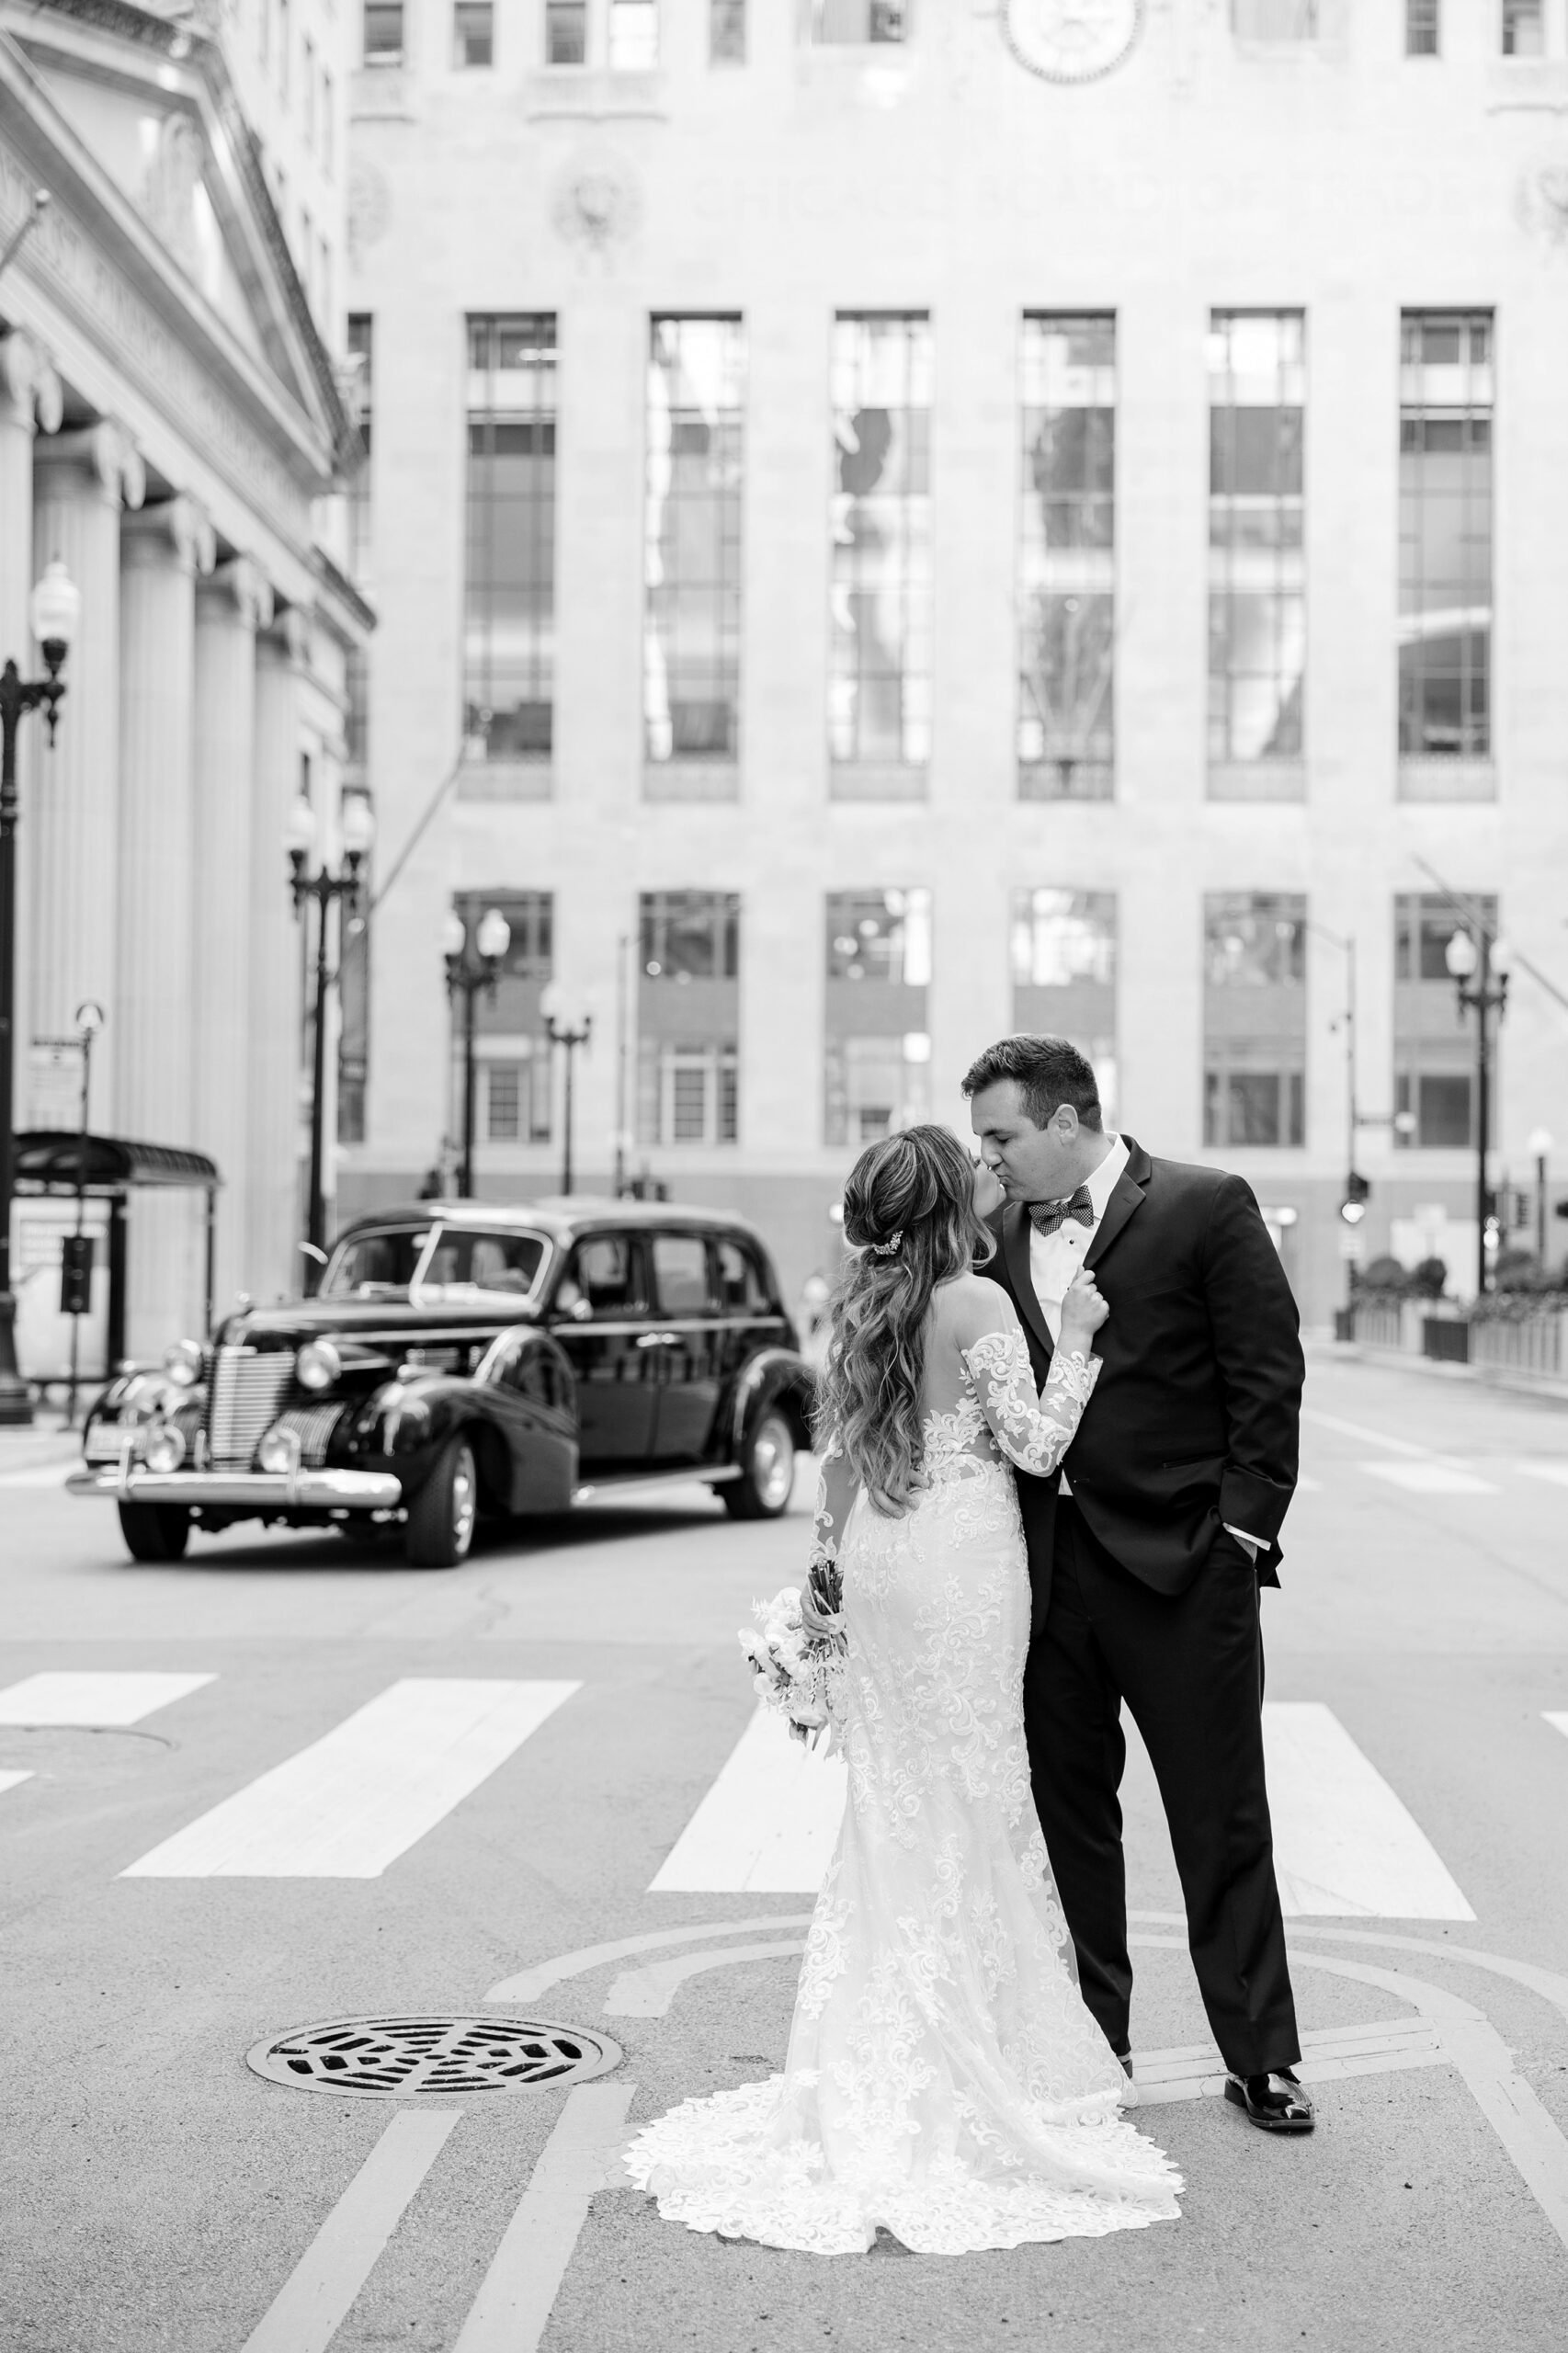 Bride and groom kiss in front of vintage car